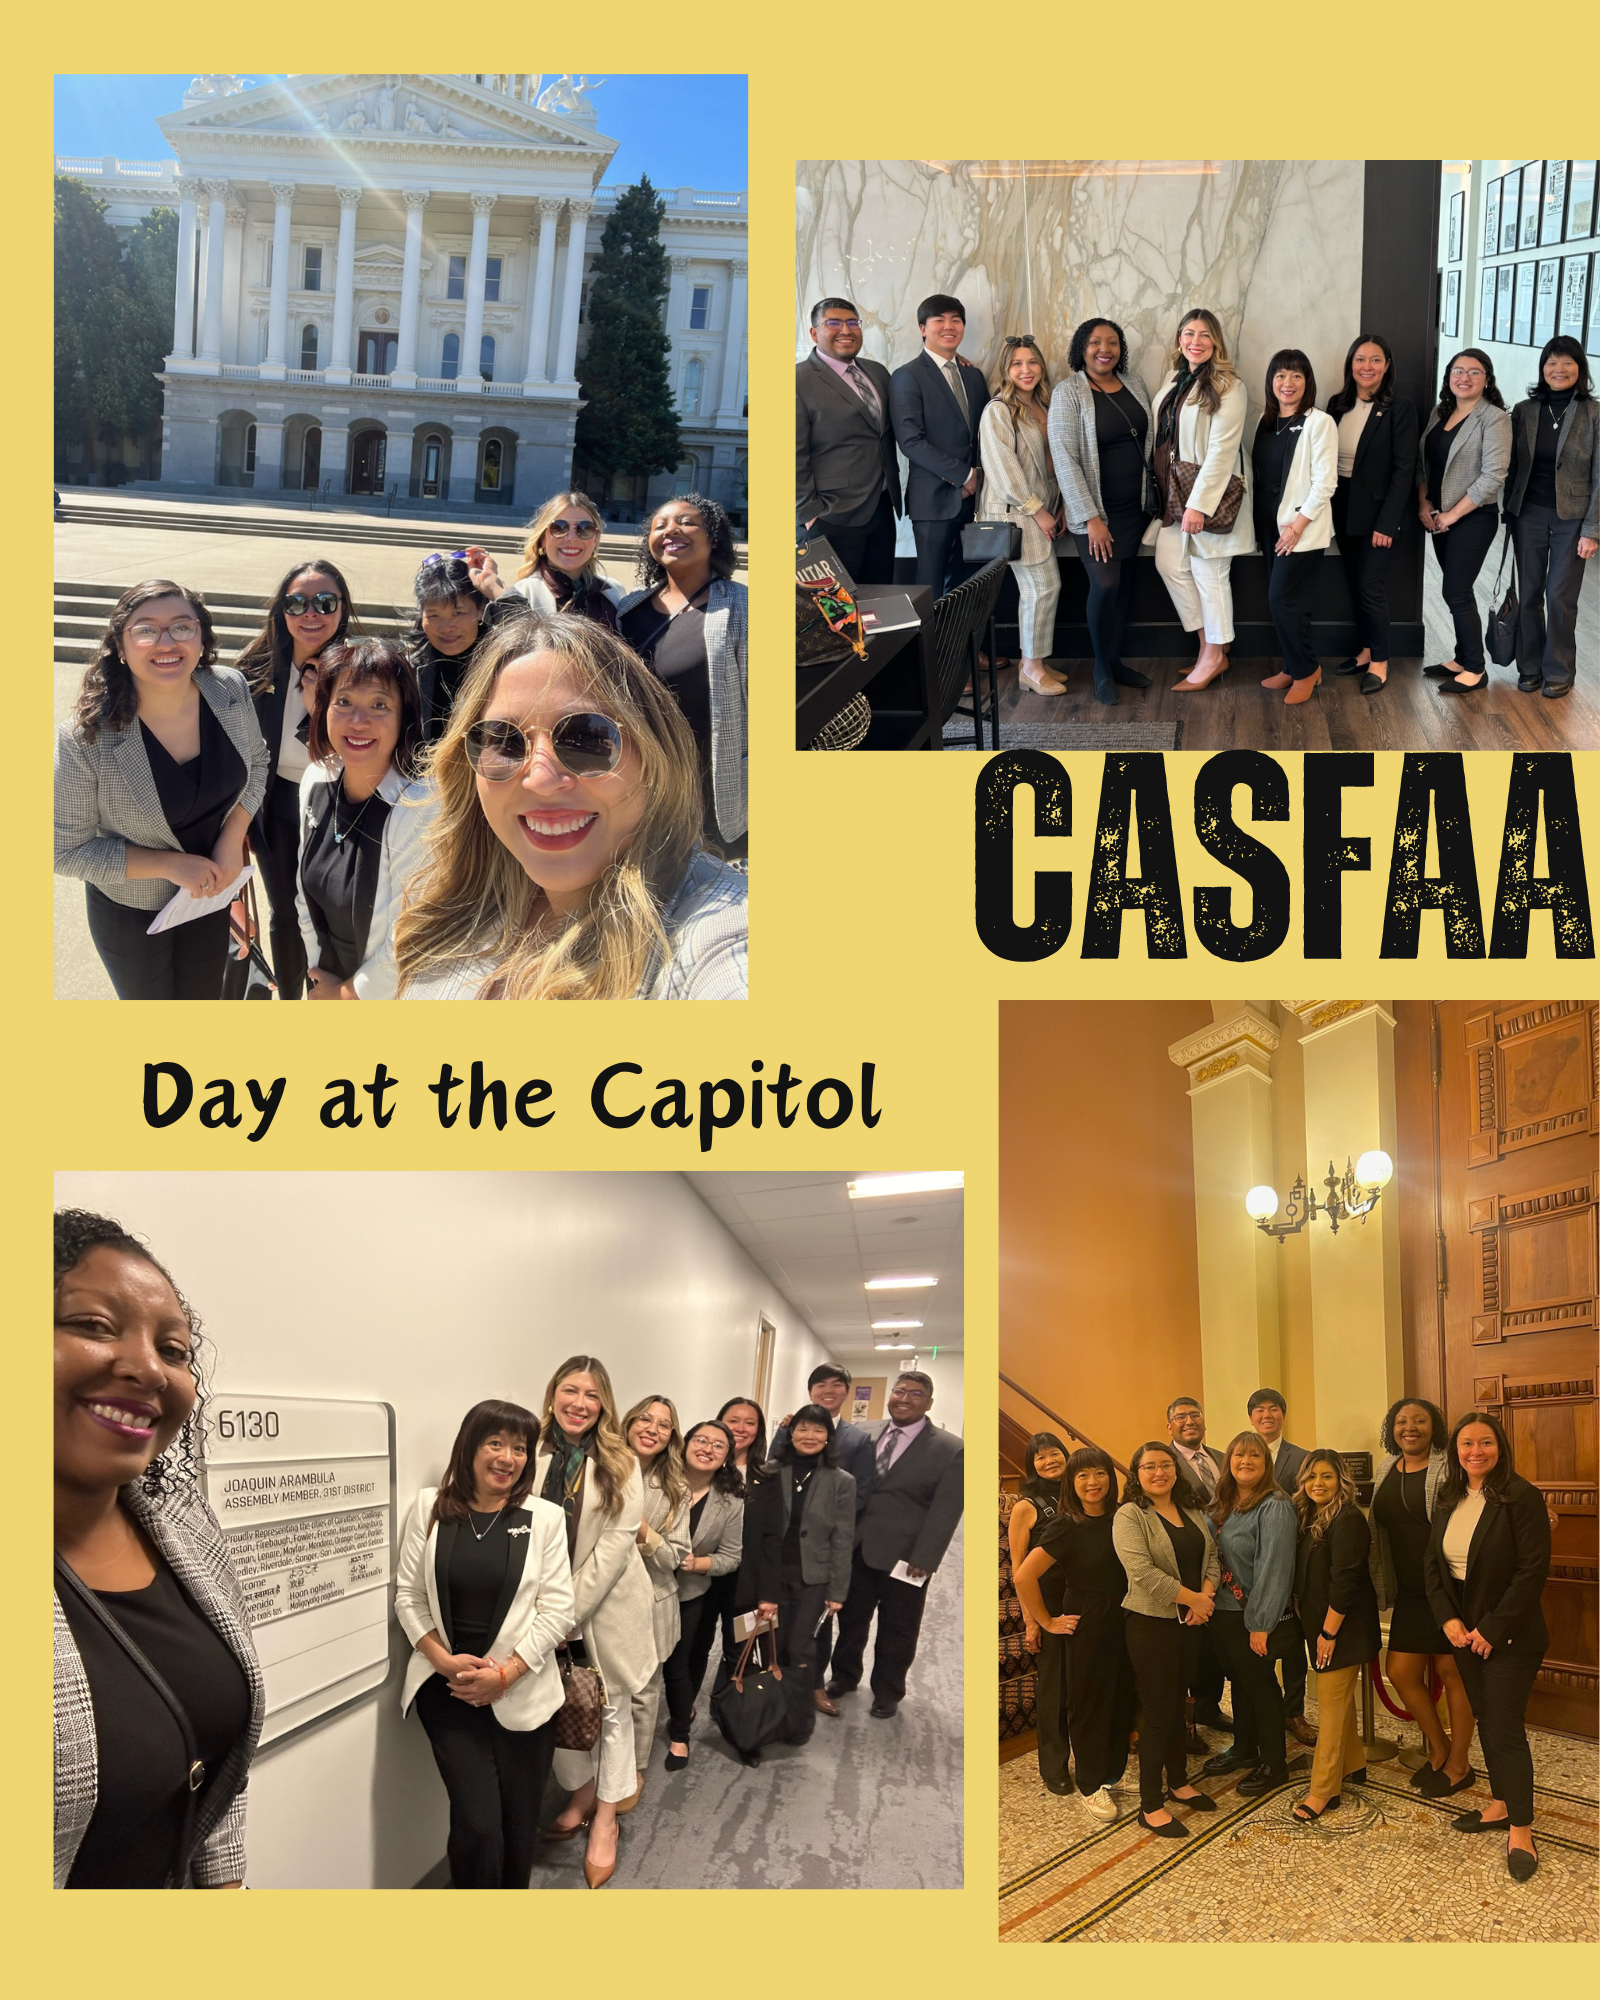 CASFAA's Day at the Capitol